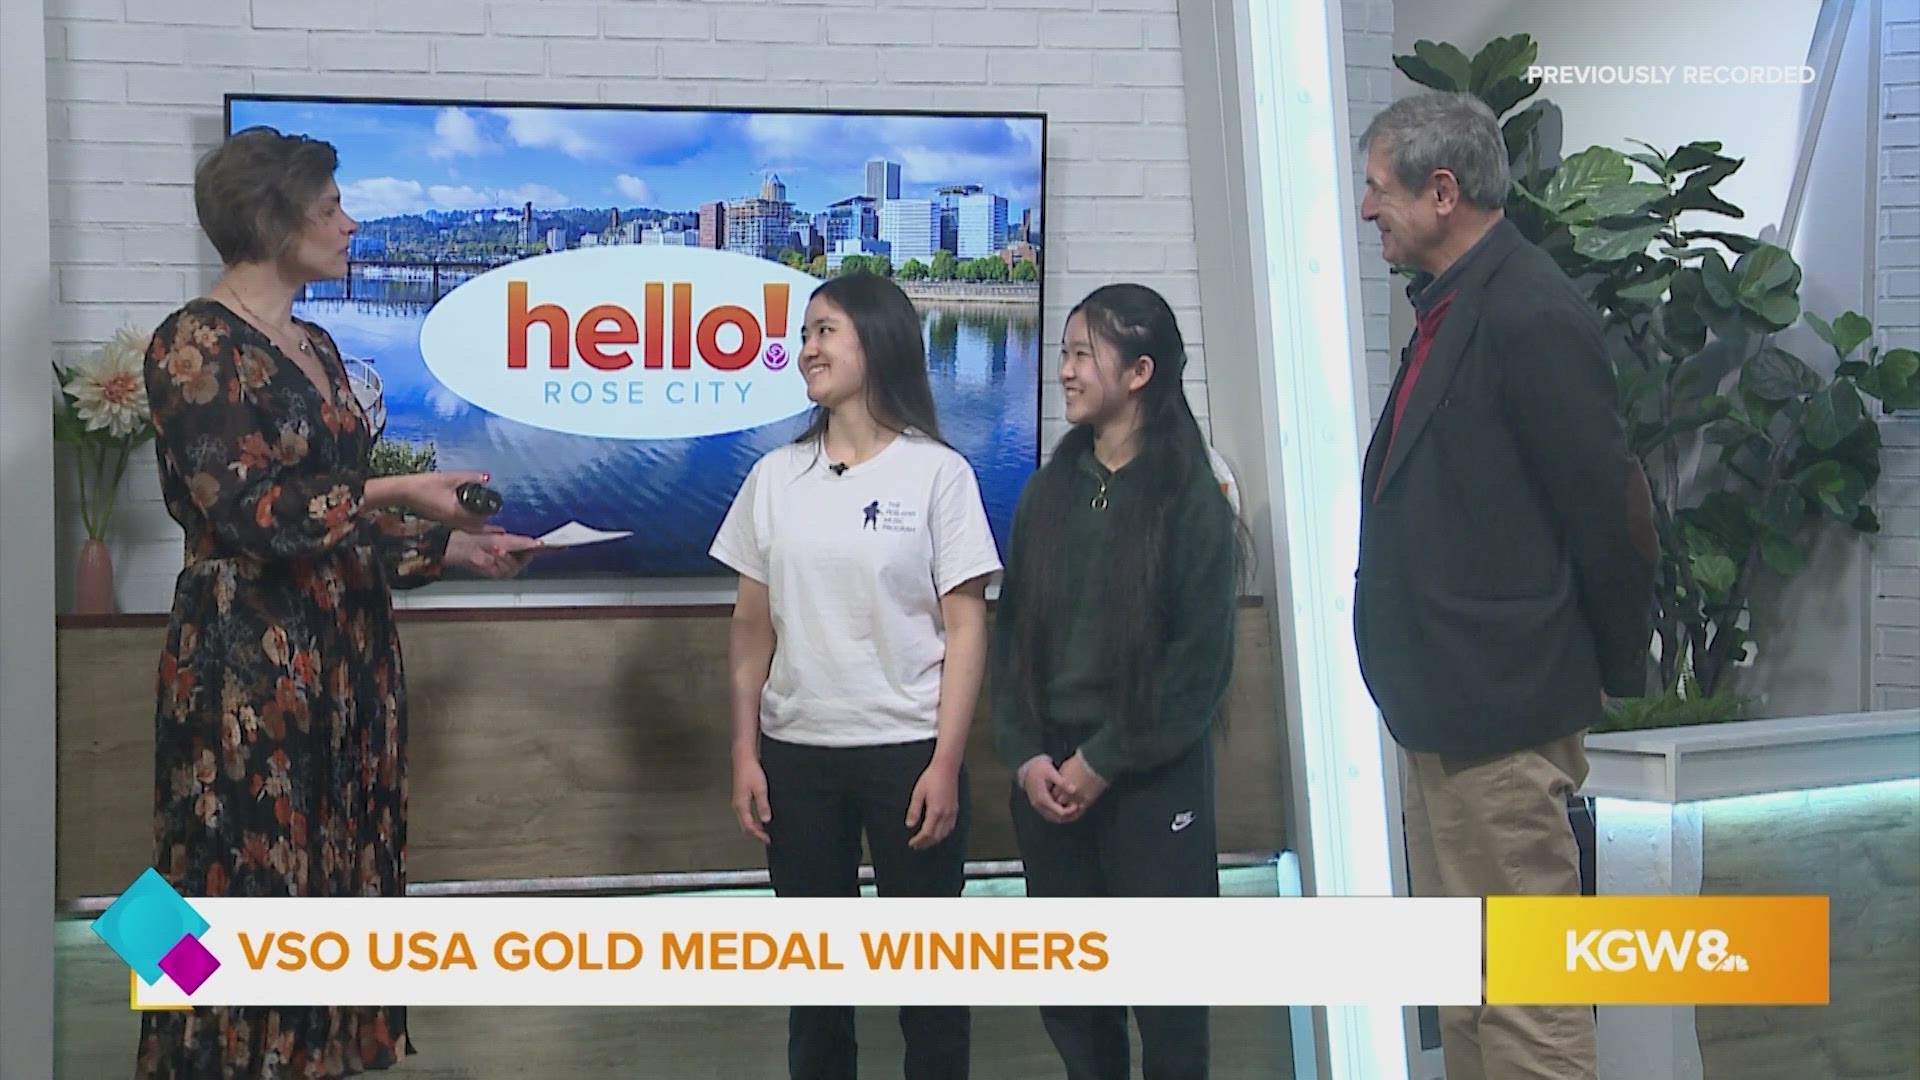 Esme Arias-Kim and Xinran Shi are two of the gold medal winners of the young artist competition